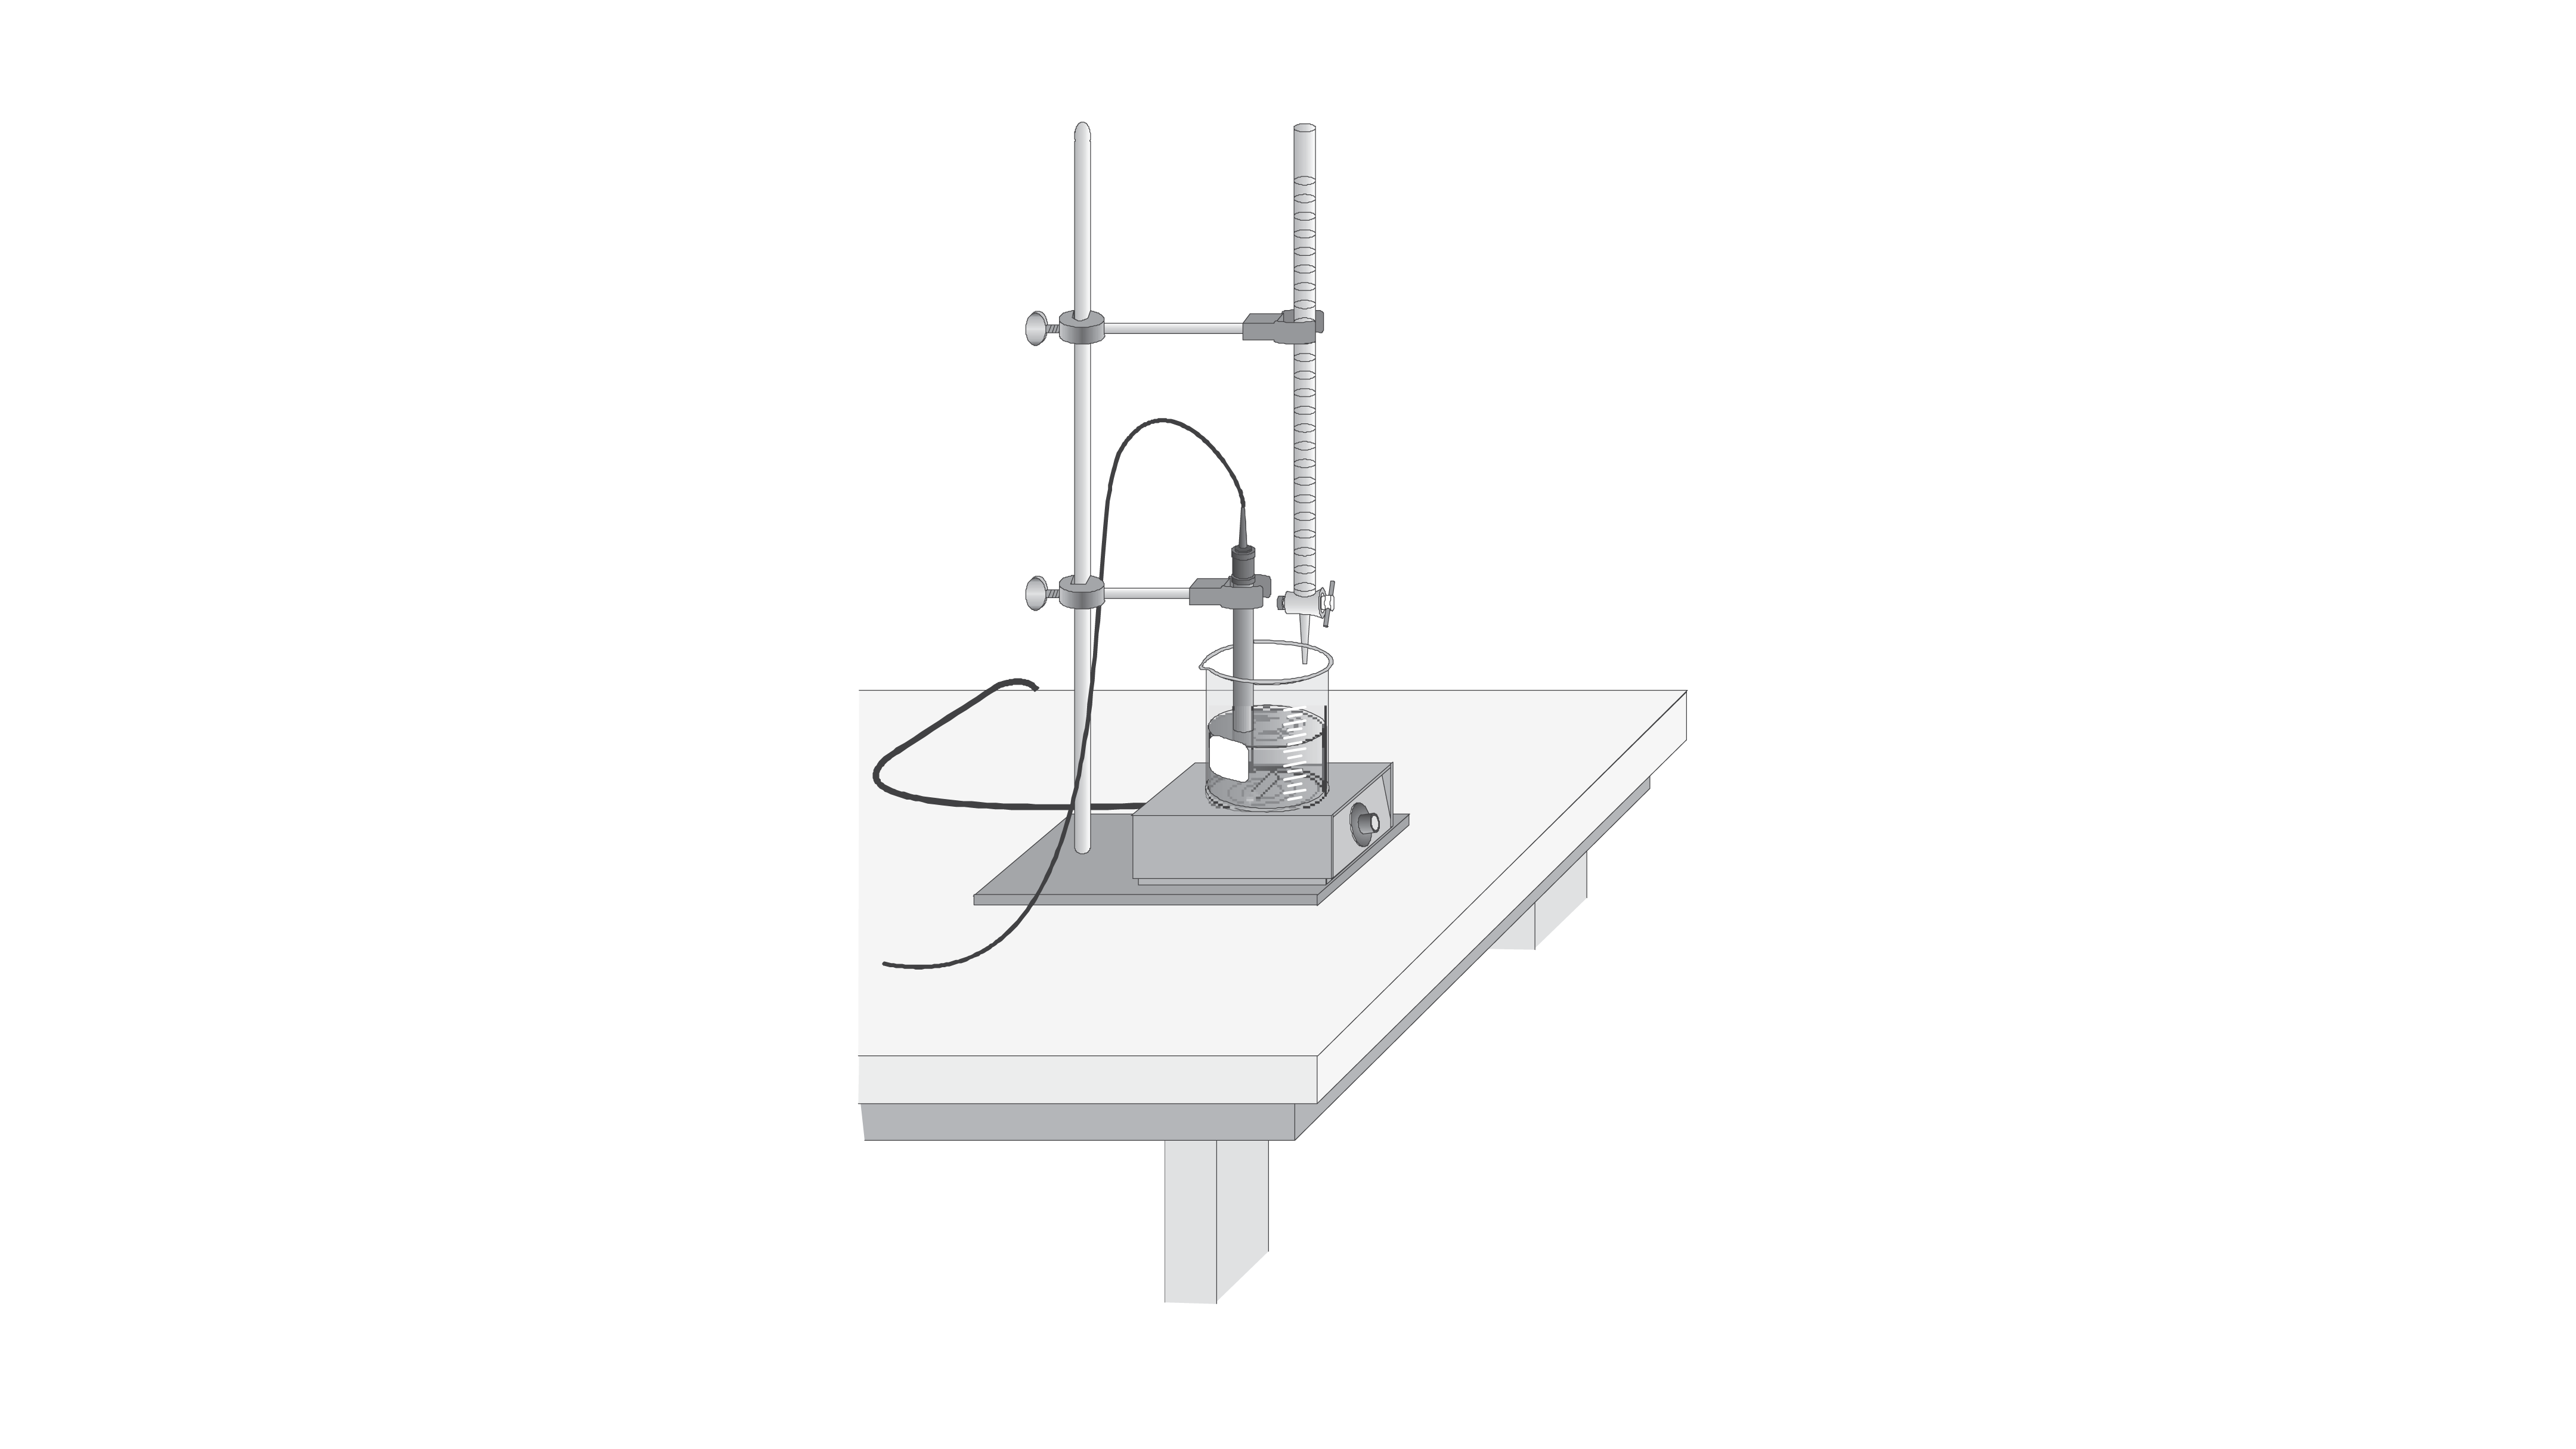 determination of solubility product of calcium hydroxide by titration